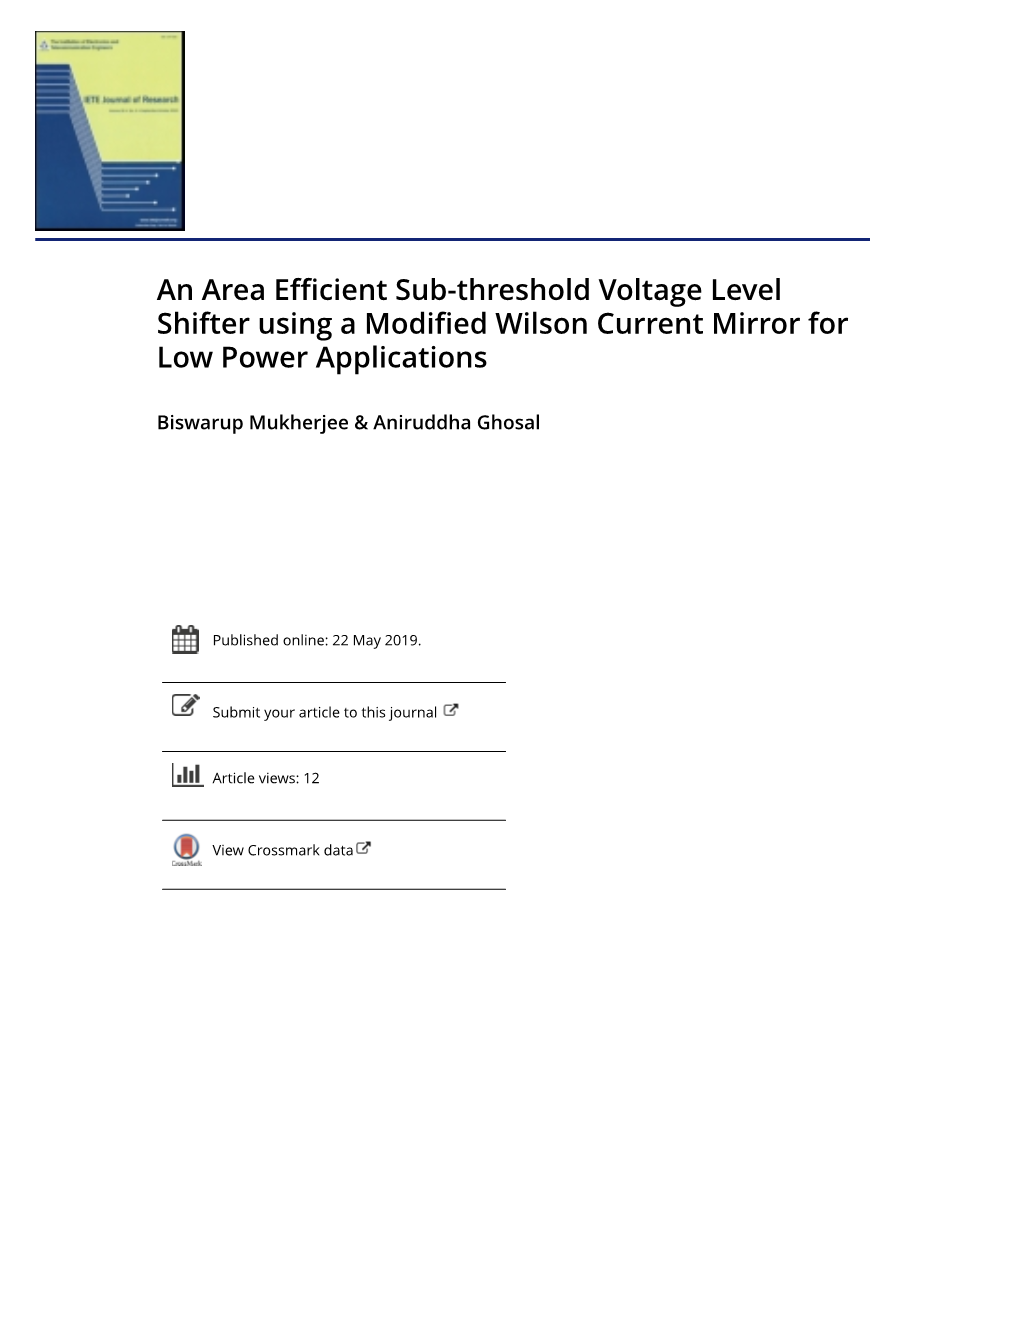 An Area Efficient Sub-Threshold Voltage Level Shifter Using a Modified Wilson Current Mirror for Low Power Applications